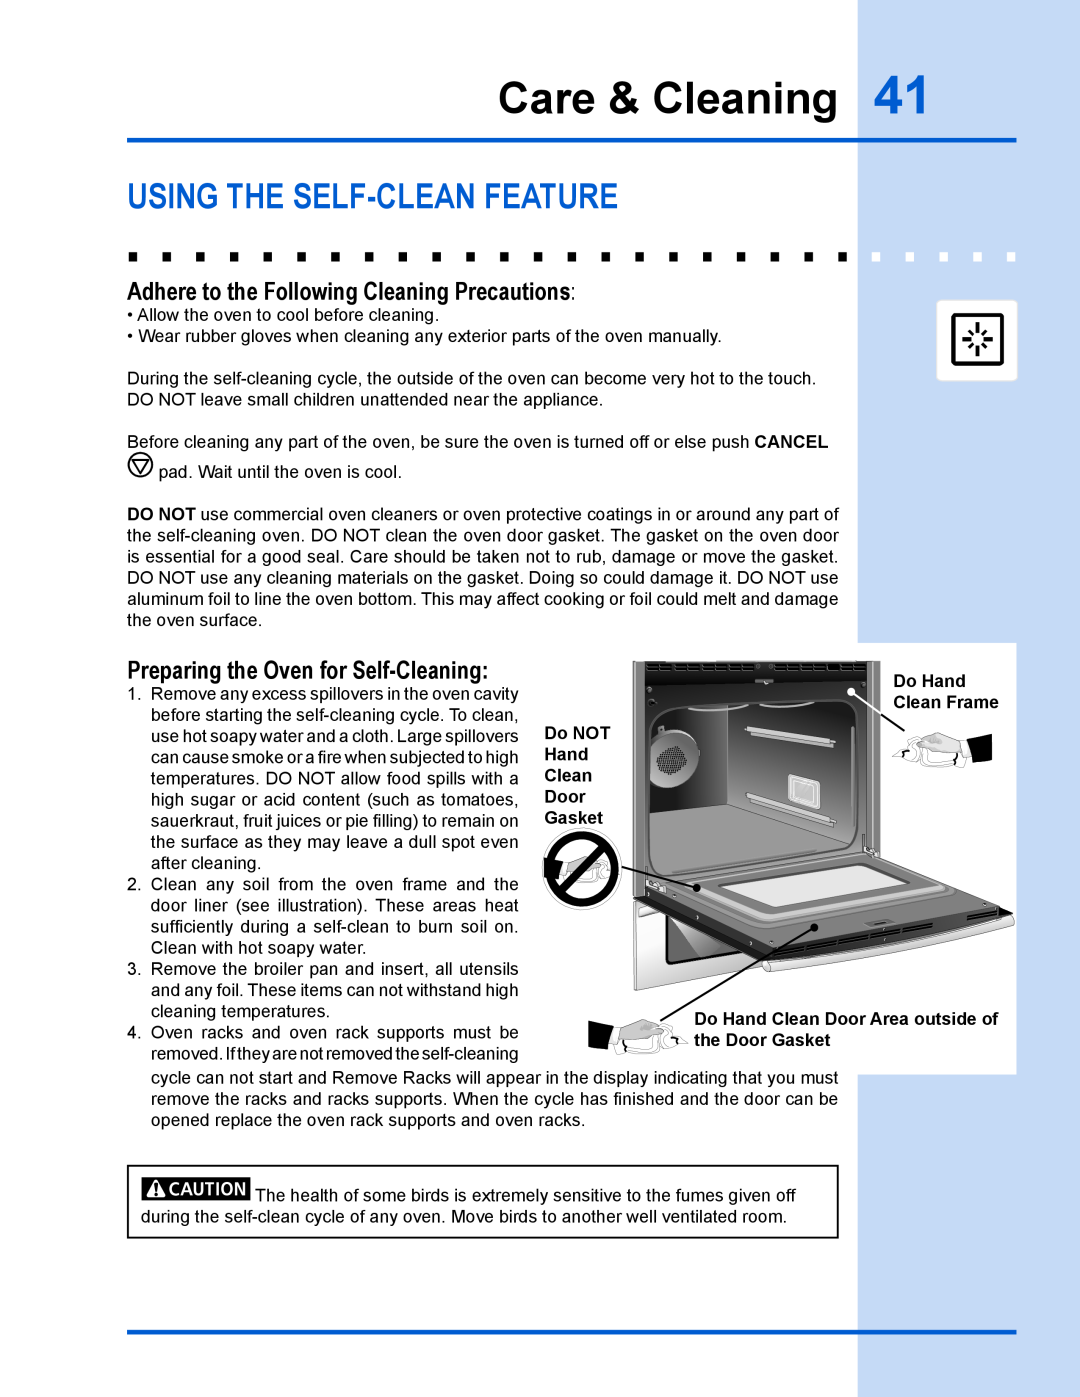 Electrolux EW30GS65GS Care & Cleaning, Using the self-clean feature, Adhere to the Following Cleaning Precautions, Do Hand 